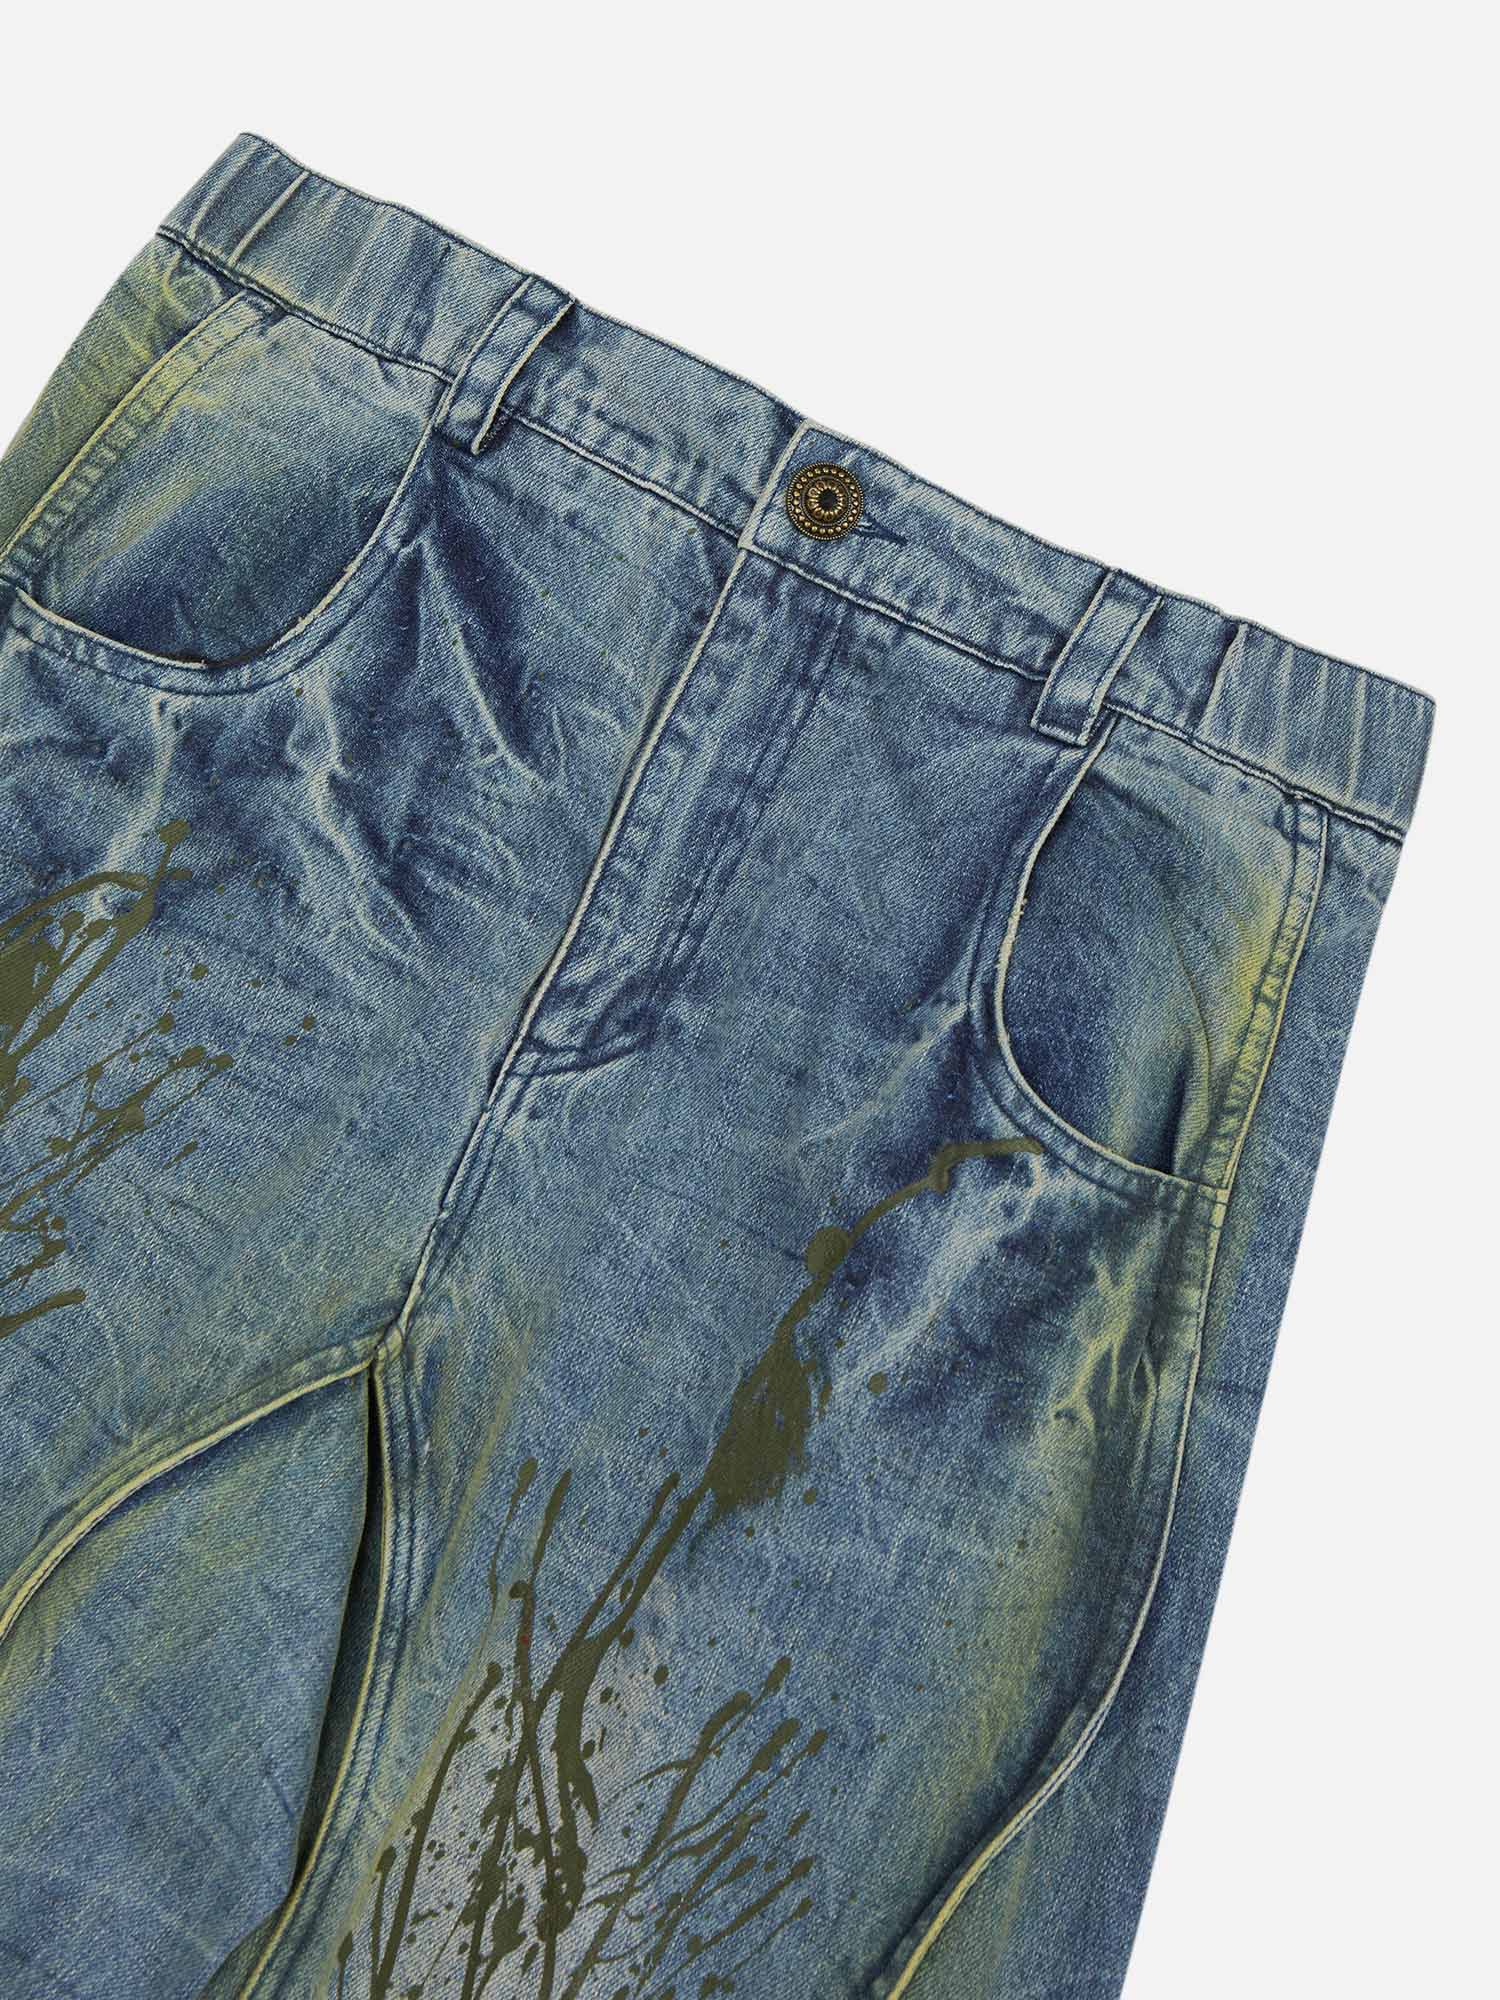 American Street Heavy Duty Washed Distressed Jeans